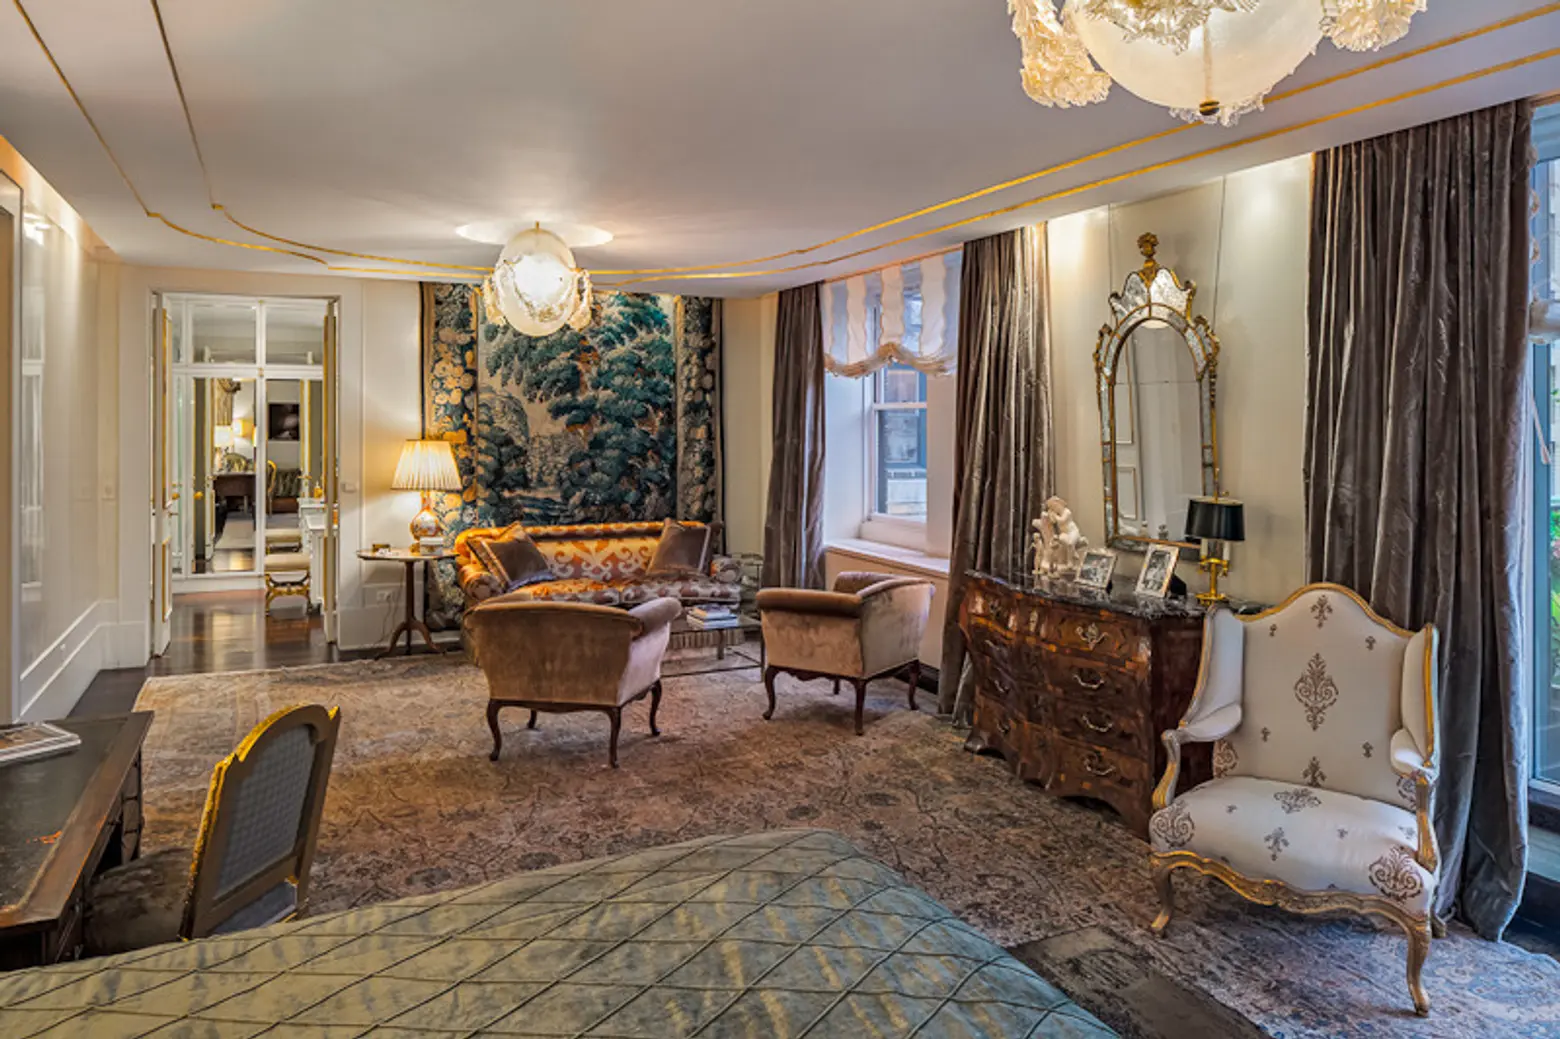 Palatial Co-op at the Sherry Netherland Reduces Price to $85 Million ...